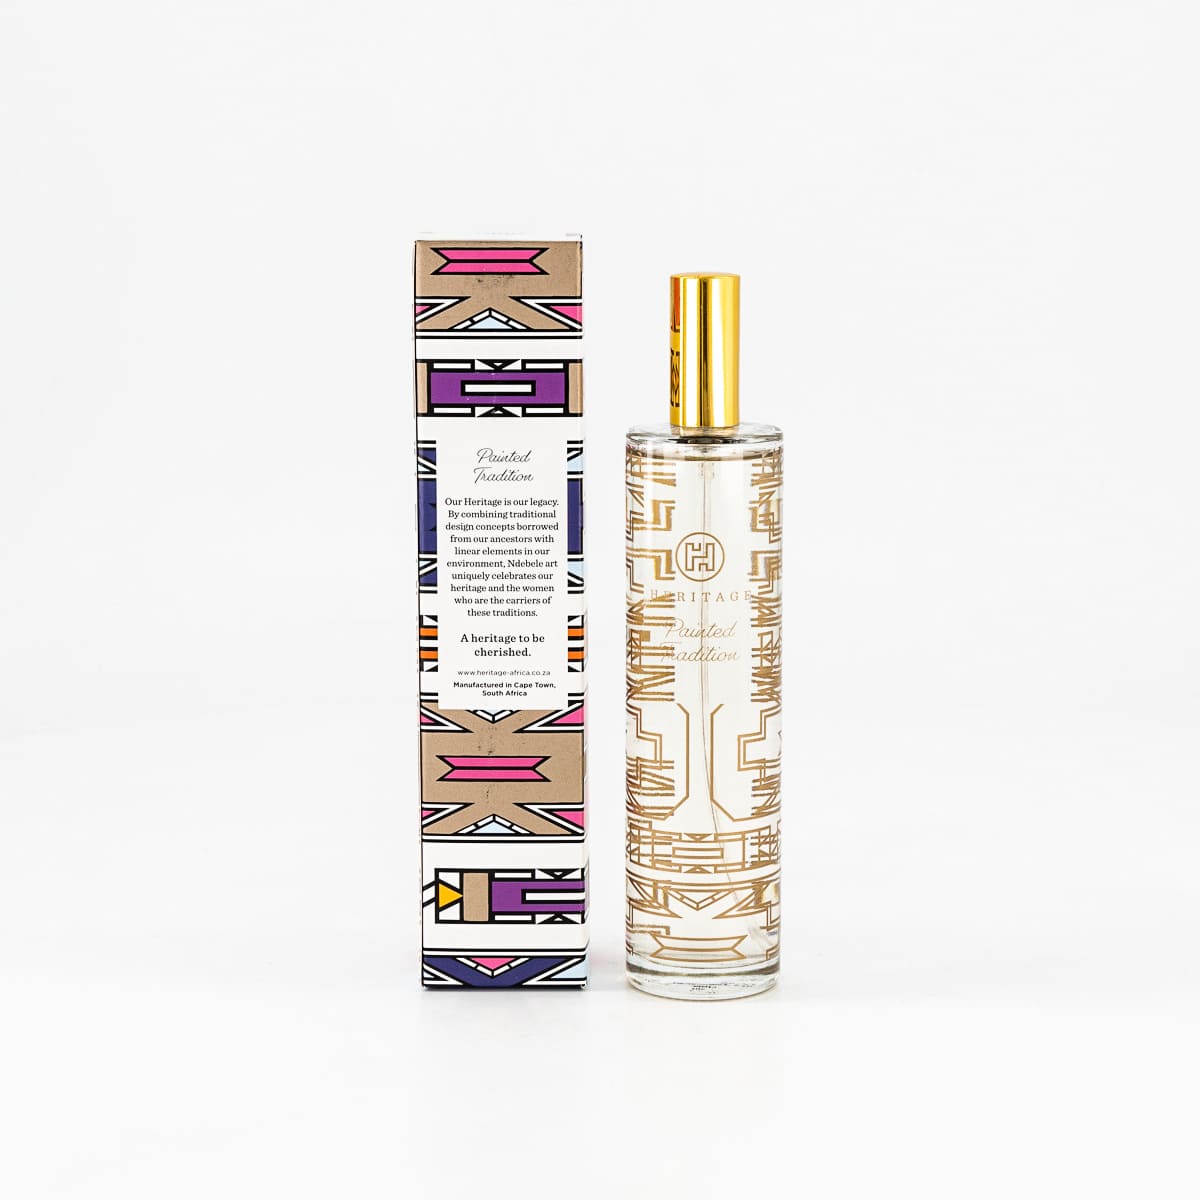 100ml Heritage Room Spray in the fragrance Painted Tradition with the traditional Ndebele tribe pattern boxed packaging 